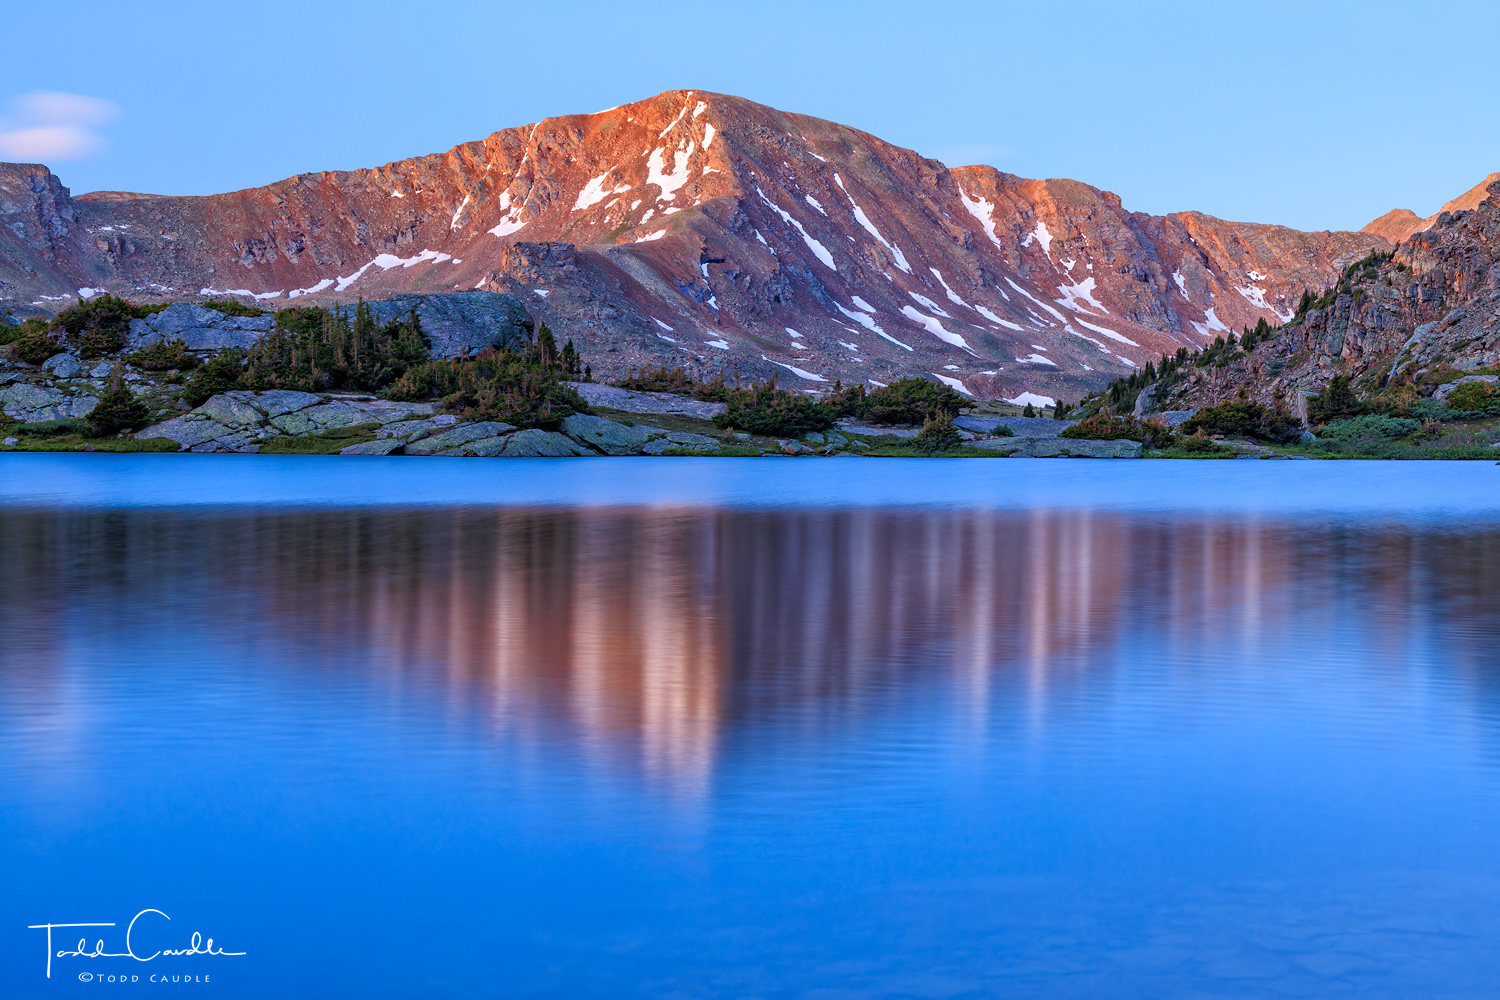 Alpenglow light on Deer Mountain reflects in one of the two North Halfmoon Lakes at sunrise.